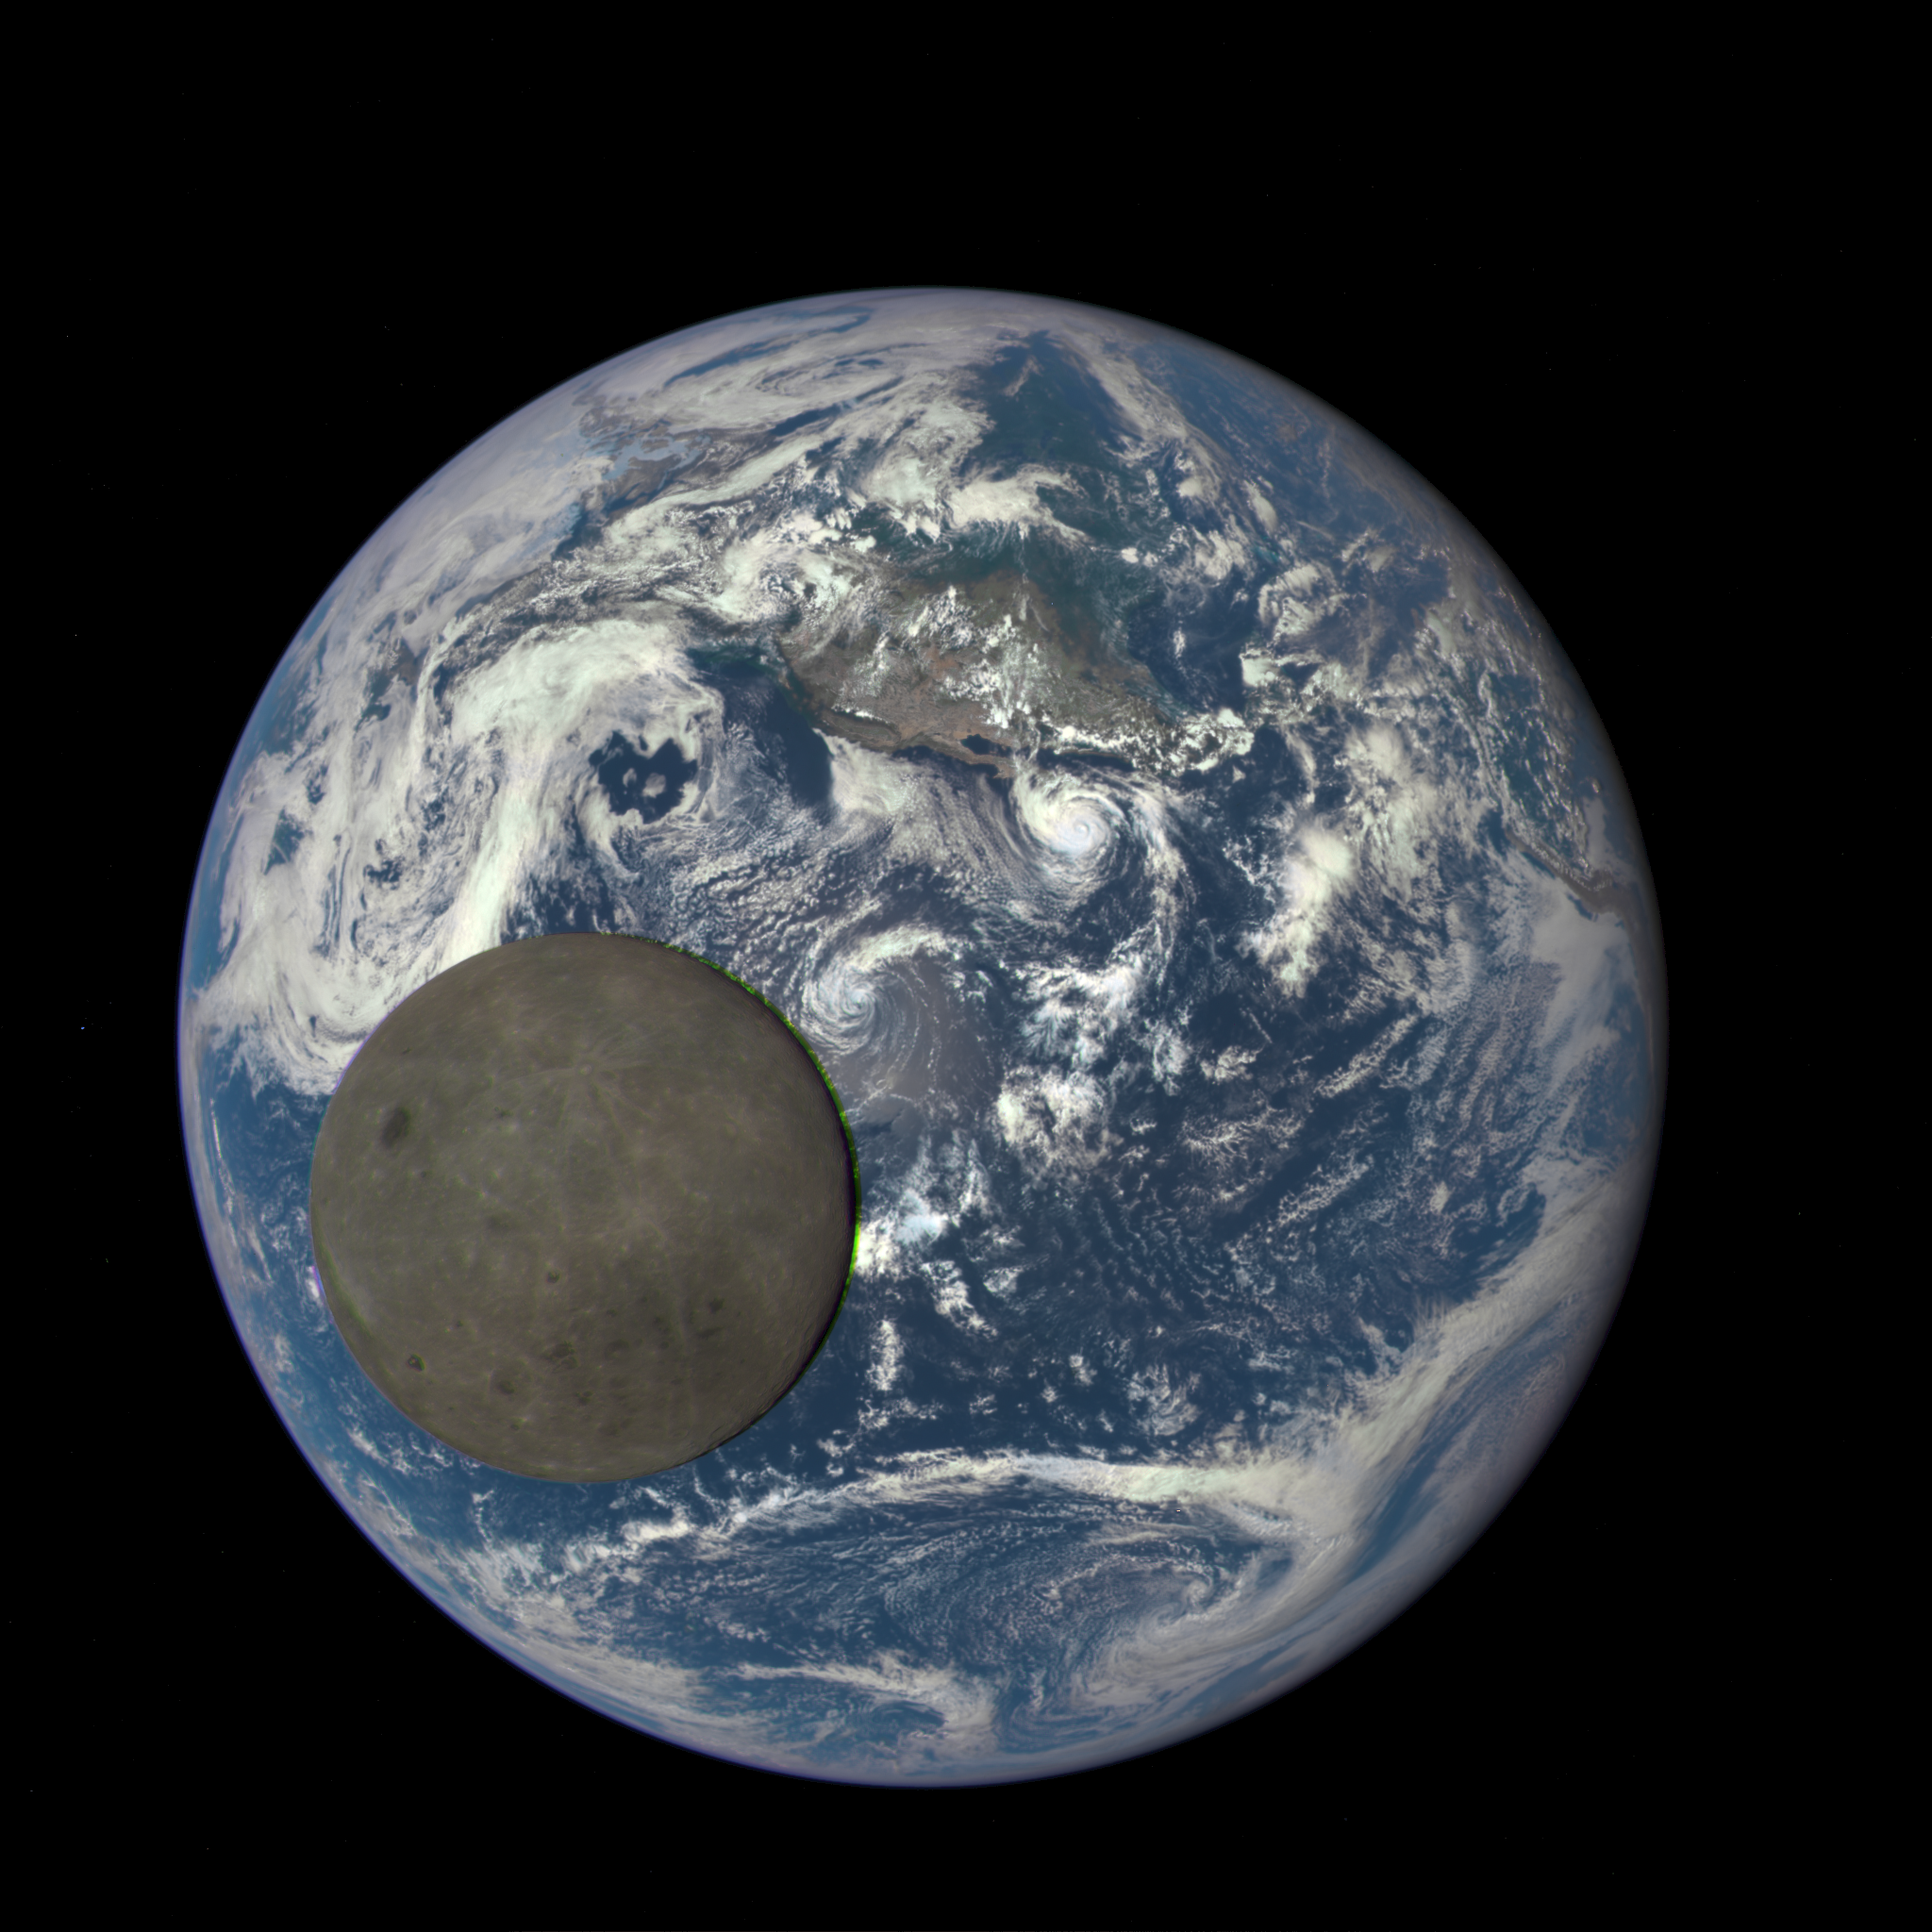 moon's far side overlapping the Earth